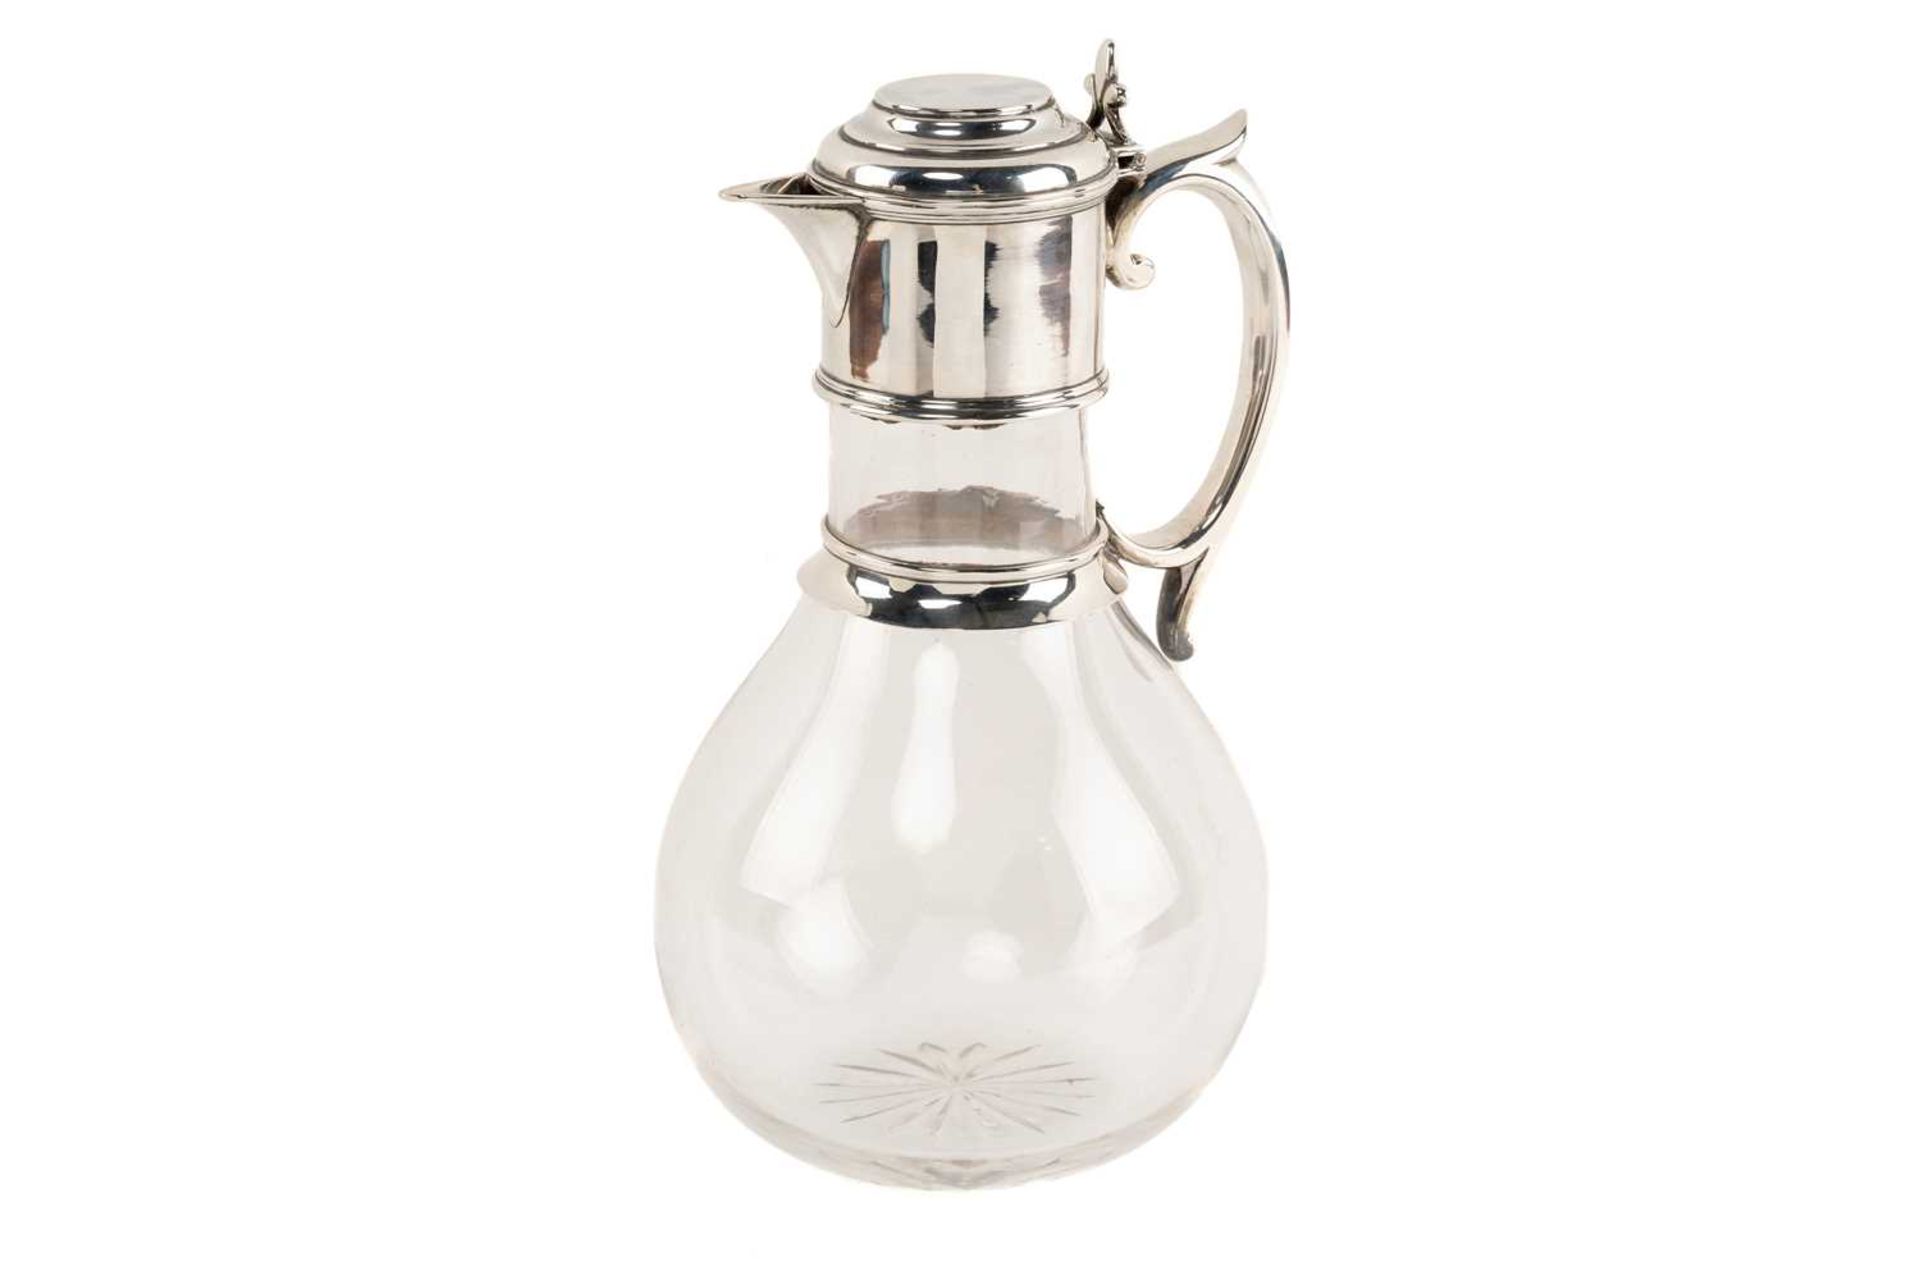 Victorian silver mounted clear glass claret ewer, London 1885 by Rupert Favell, with loop handle and